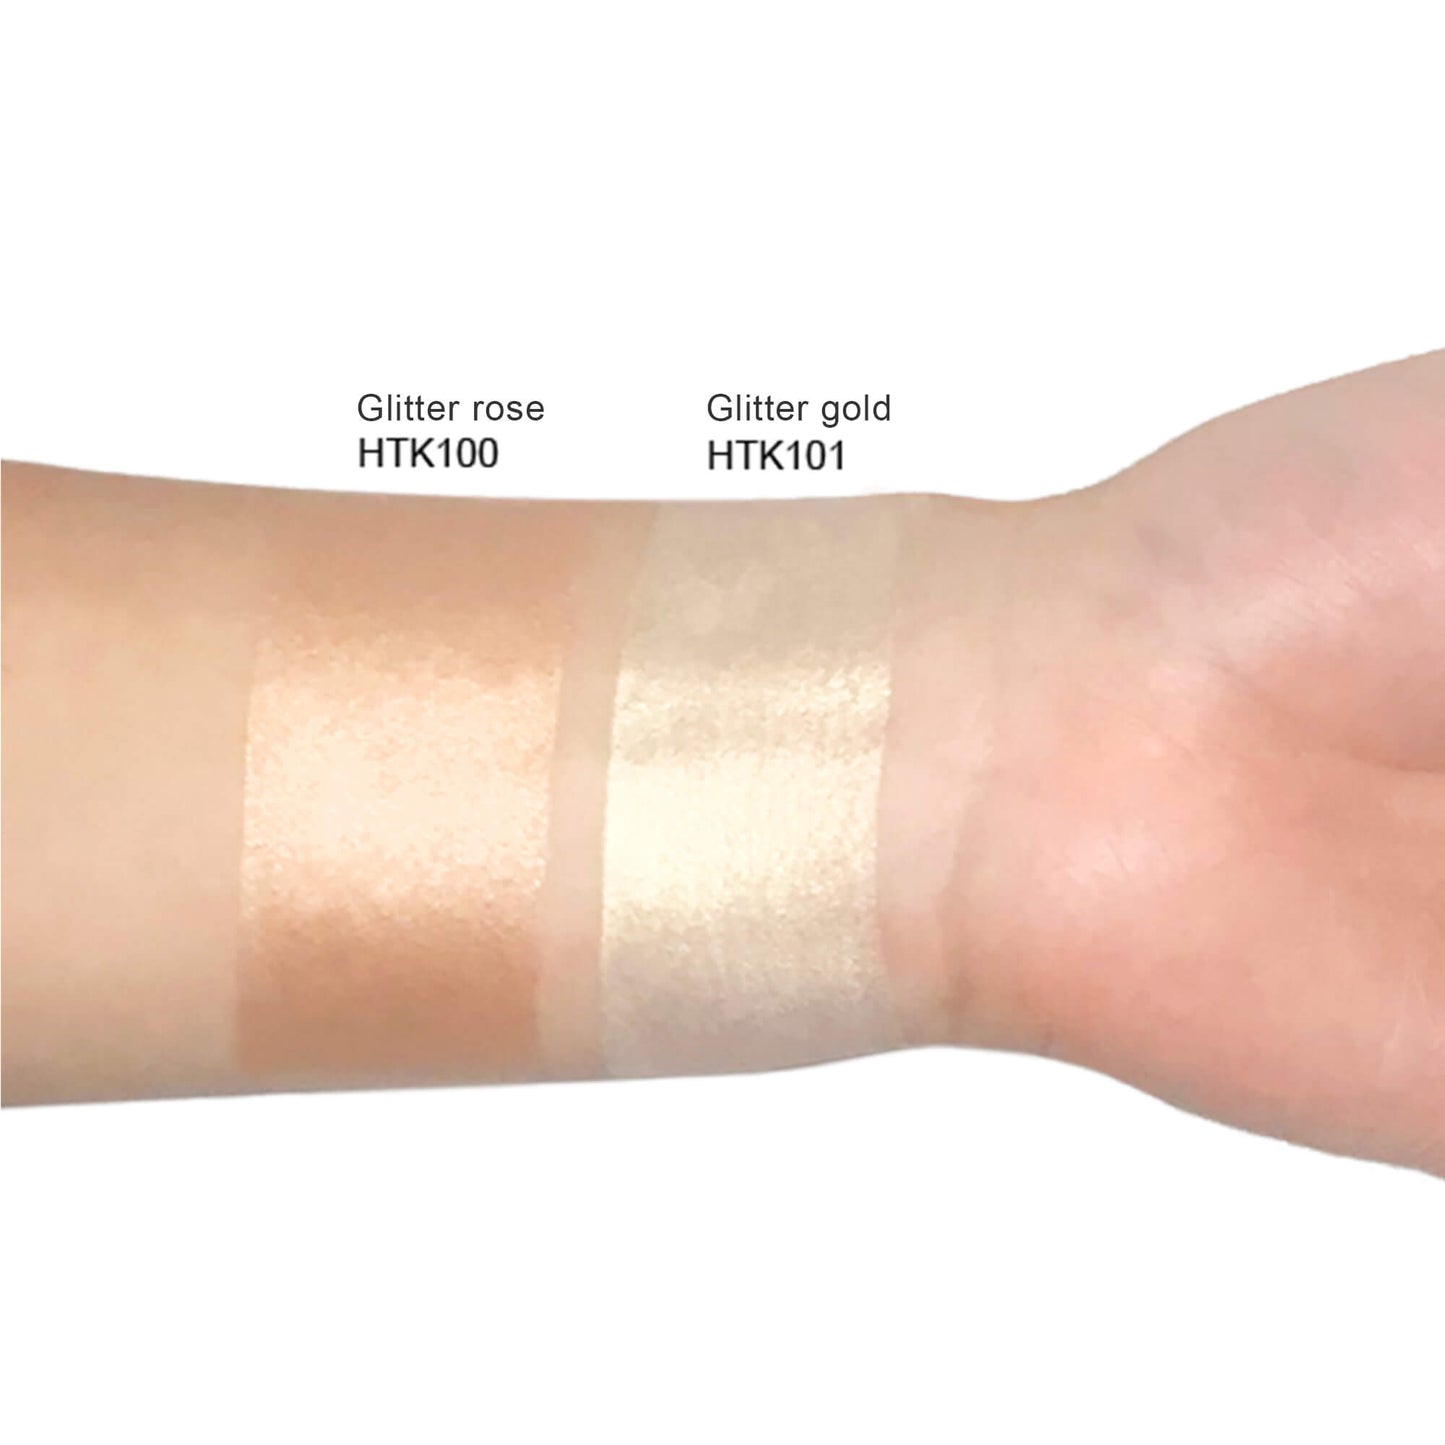 Add some sparkle to your makeup routine with Cruisin Organics Glitter Gold Highlighter Stick. Made with nourishing jojoba oil, this easy-to-apply stick adds a luminous sheen to your cheekbones for a radiant, plump finish. Ideal for achieving a natural, flawless look, this microshimmer stick is a must-have for any daring glow-up!